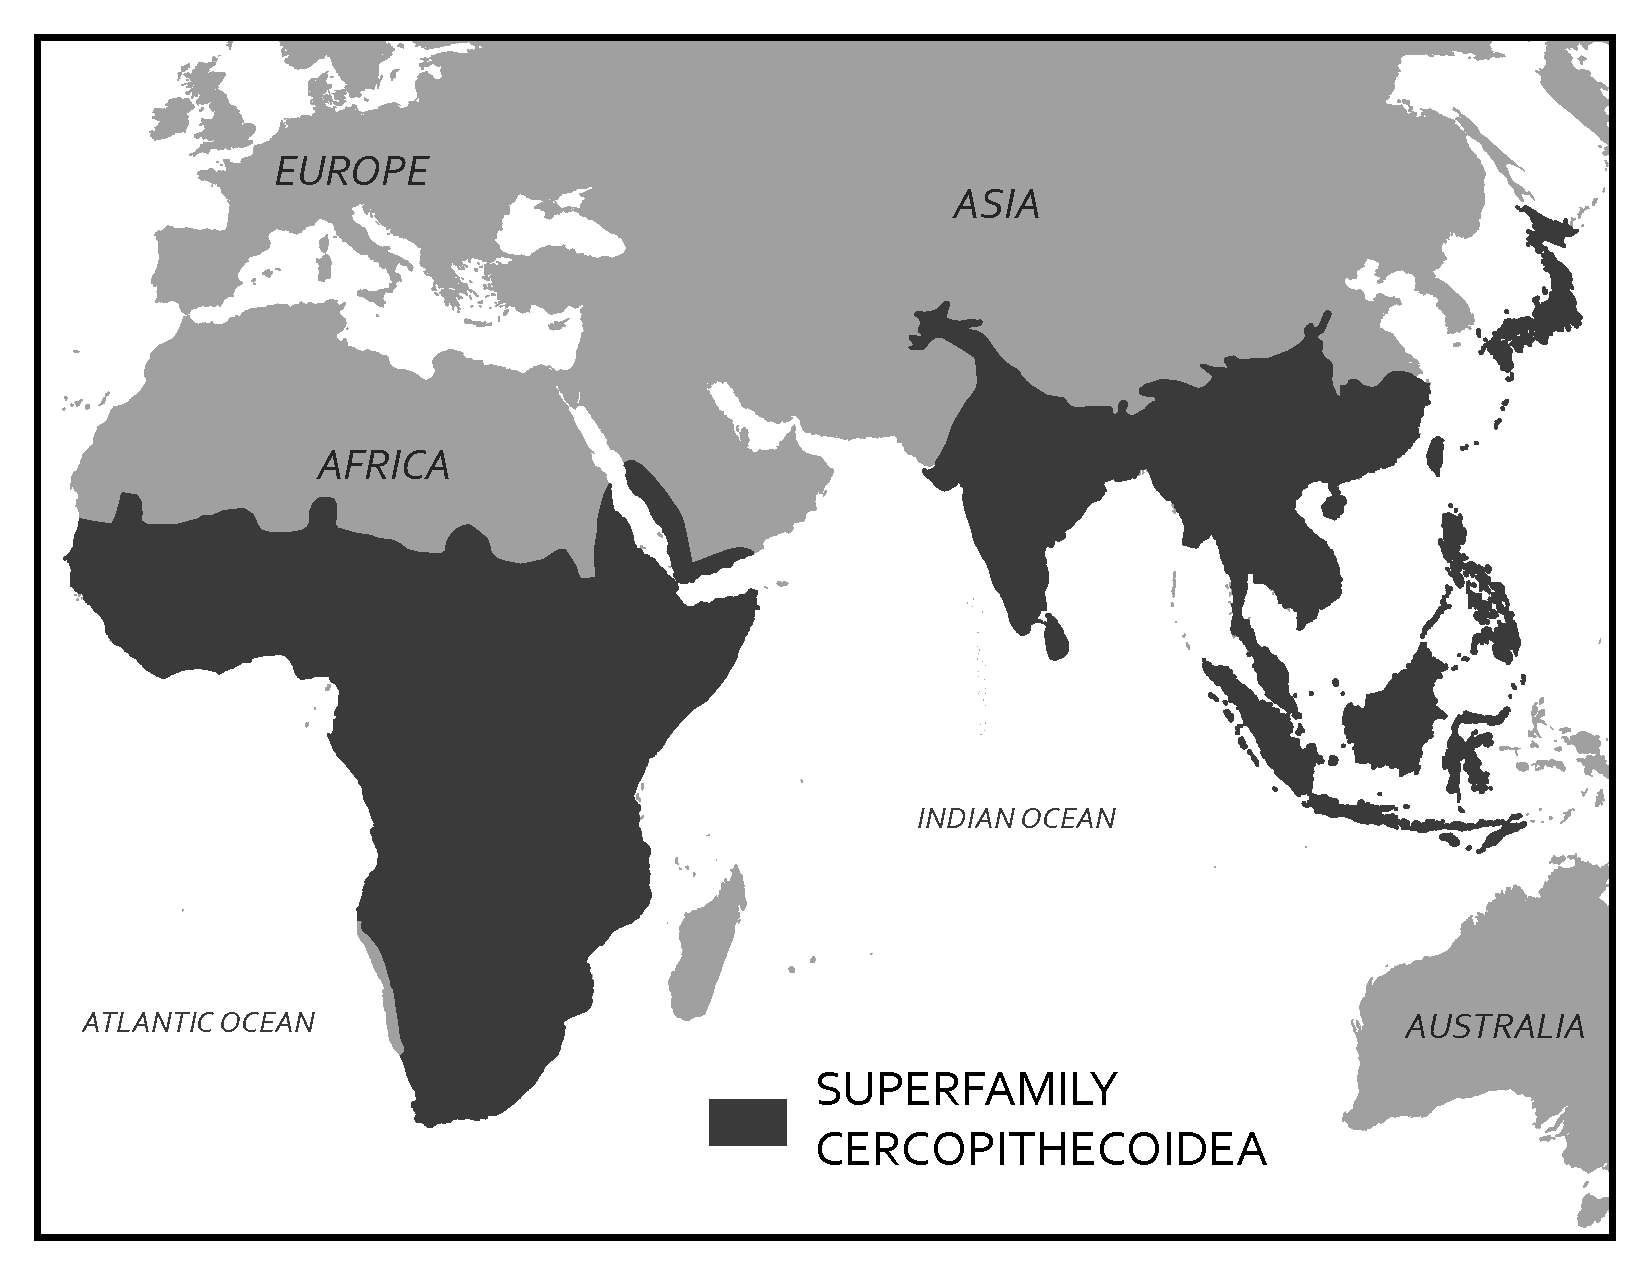 Areas of Europe, Asia, Africa, and Australia where cercopithecoids live.